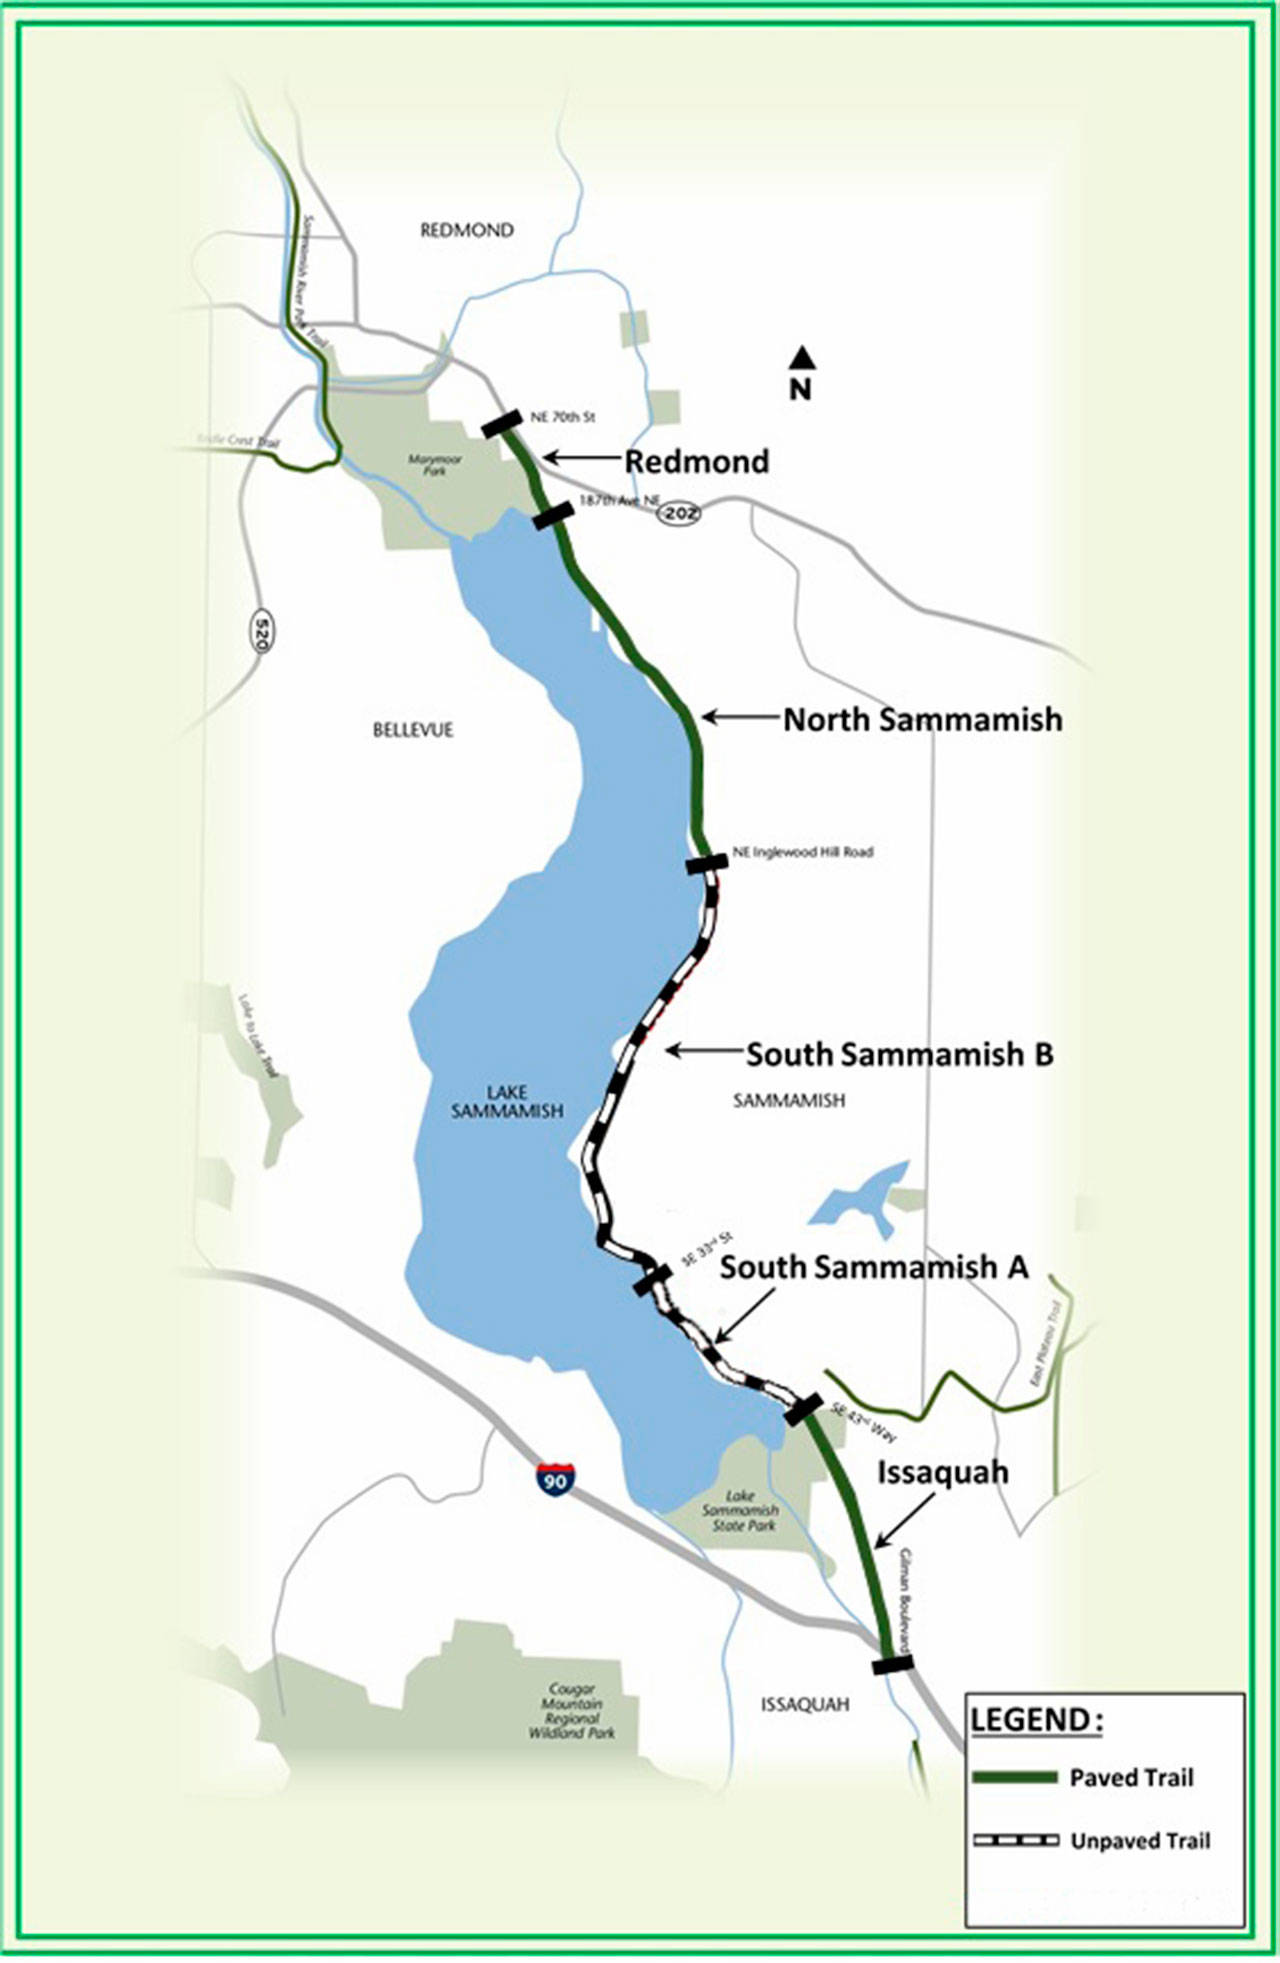 A map of the Eastlake Sammamish Trail plans. The South Sammamish A segment was recently completed and a grand opening was held in January. (Image courtesy of King County)